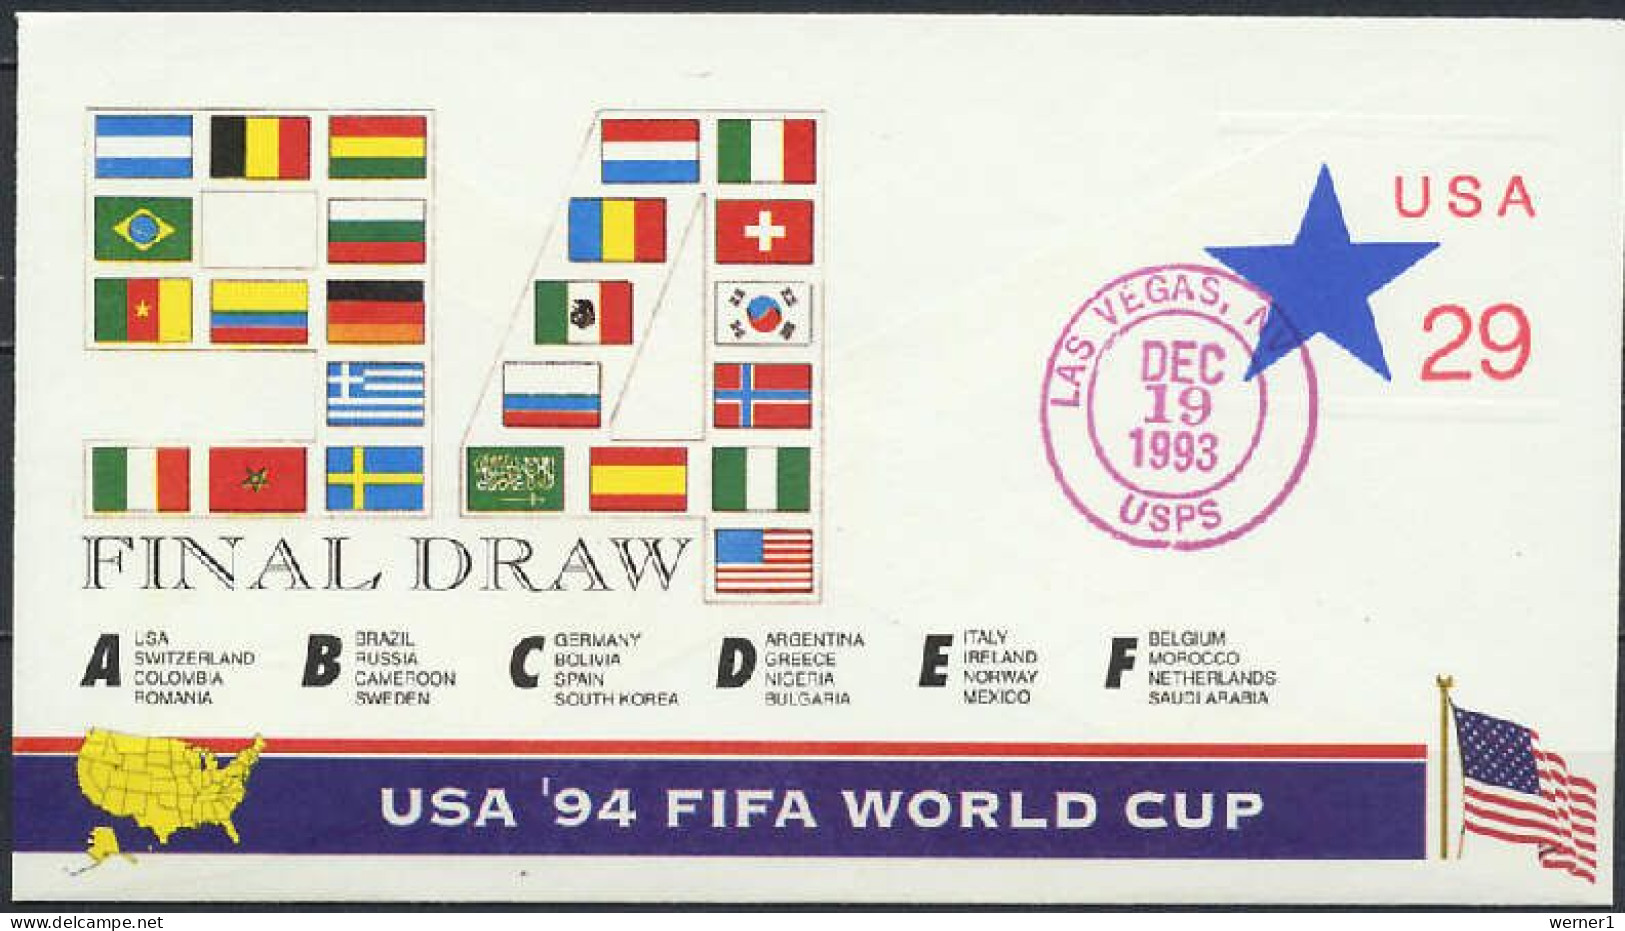 USA 1993 Football Soccer World Cup Commemorative Cover Final Draw - 1994 – USA